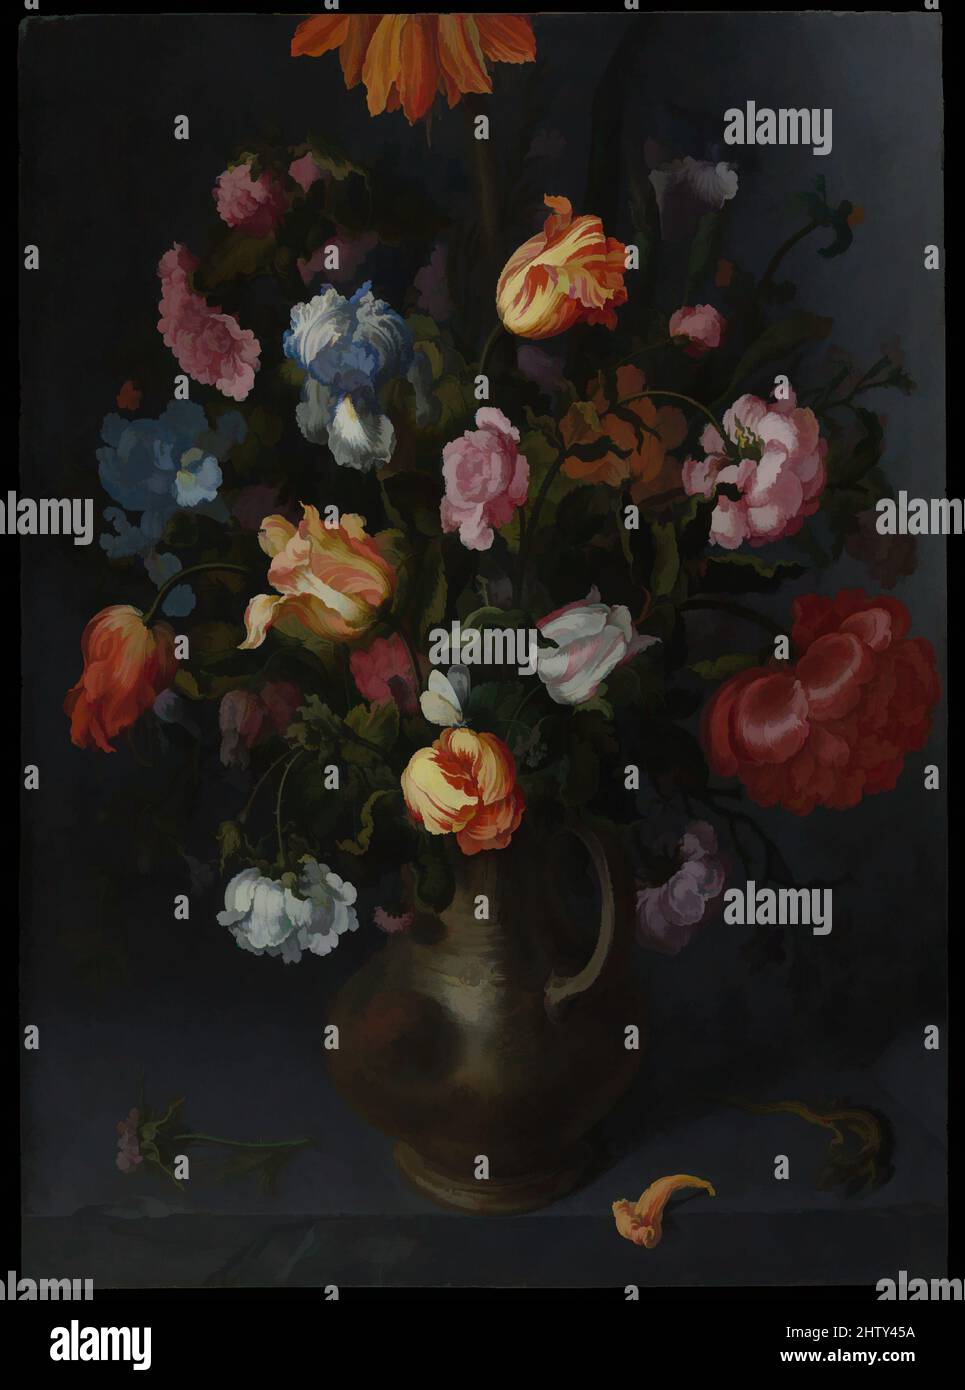 Art inspired by A Vase with Flowers, probably 1613, Oil on wood, 33 1/2 x 24 5/8 in. (85.1 x 62.5 cm), Paintings, Jacob Vosmaer (Dutch, Delft ca. 1584–1641 Delft), The Delft painter Jacob Vosmaer was an early if not pioneering specialist in the painting of flower pictures, which often, Classic works modernized by Artotop with a splash of modernity. Shapes, color and value, eye-catching visual impact on art. Emotions through freedom of artworks in a contemporary way. A timeless message pursuing a wildly creative new direction. Artists turning to the digital medium and creating the Artotop NFT Stock Photo